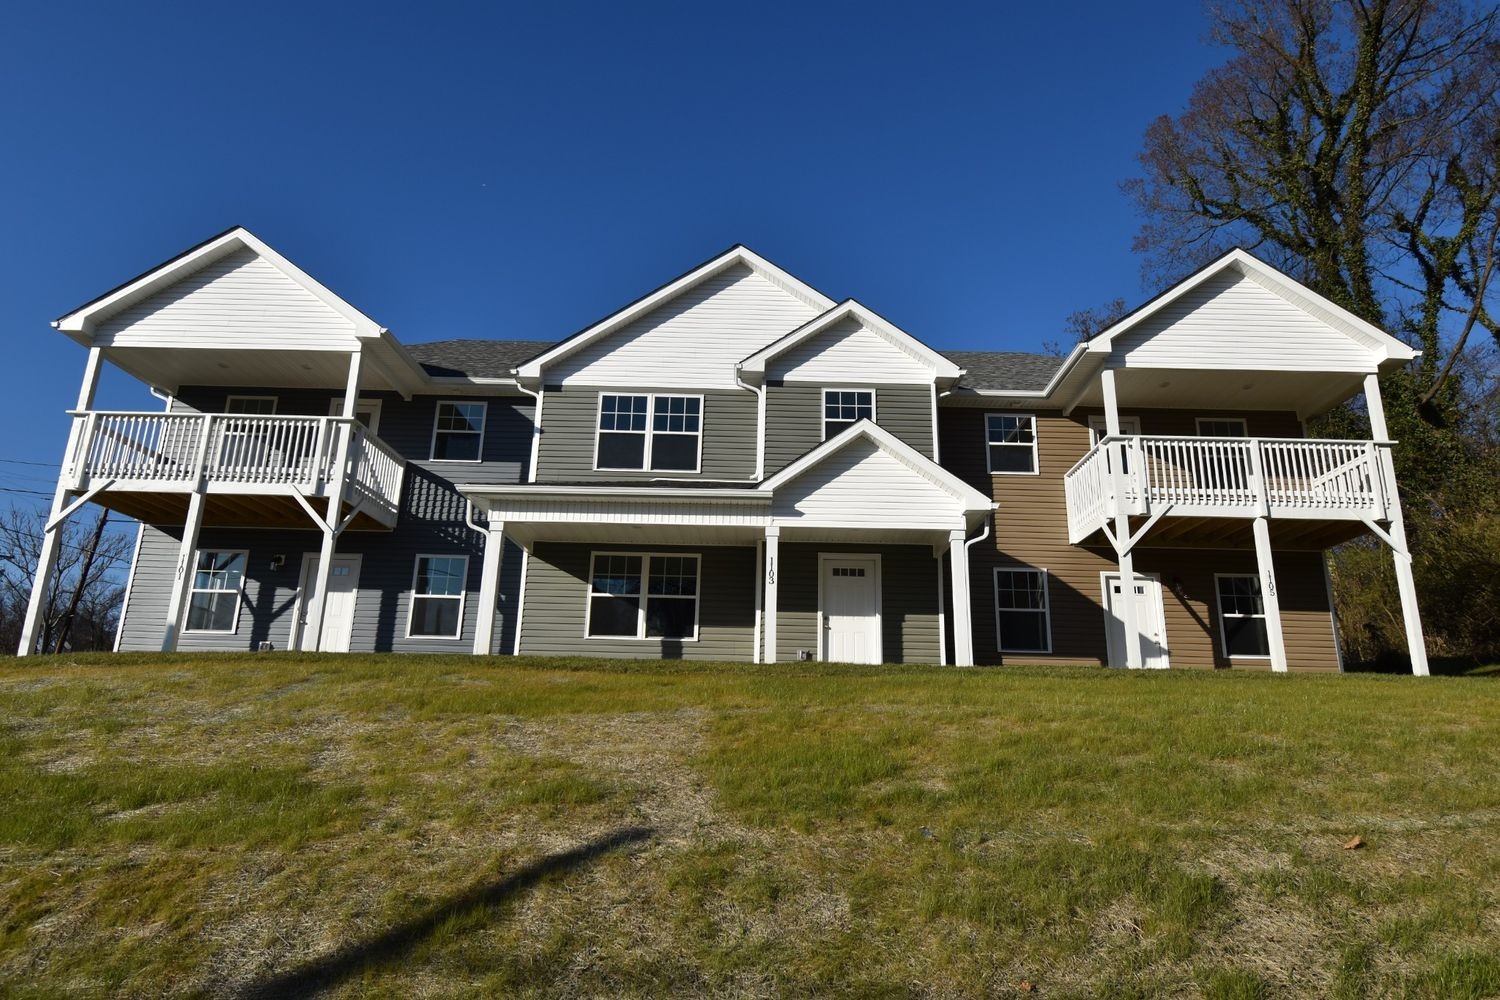 View Clarksville, TN 37040 townhome